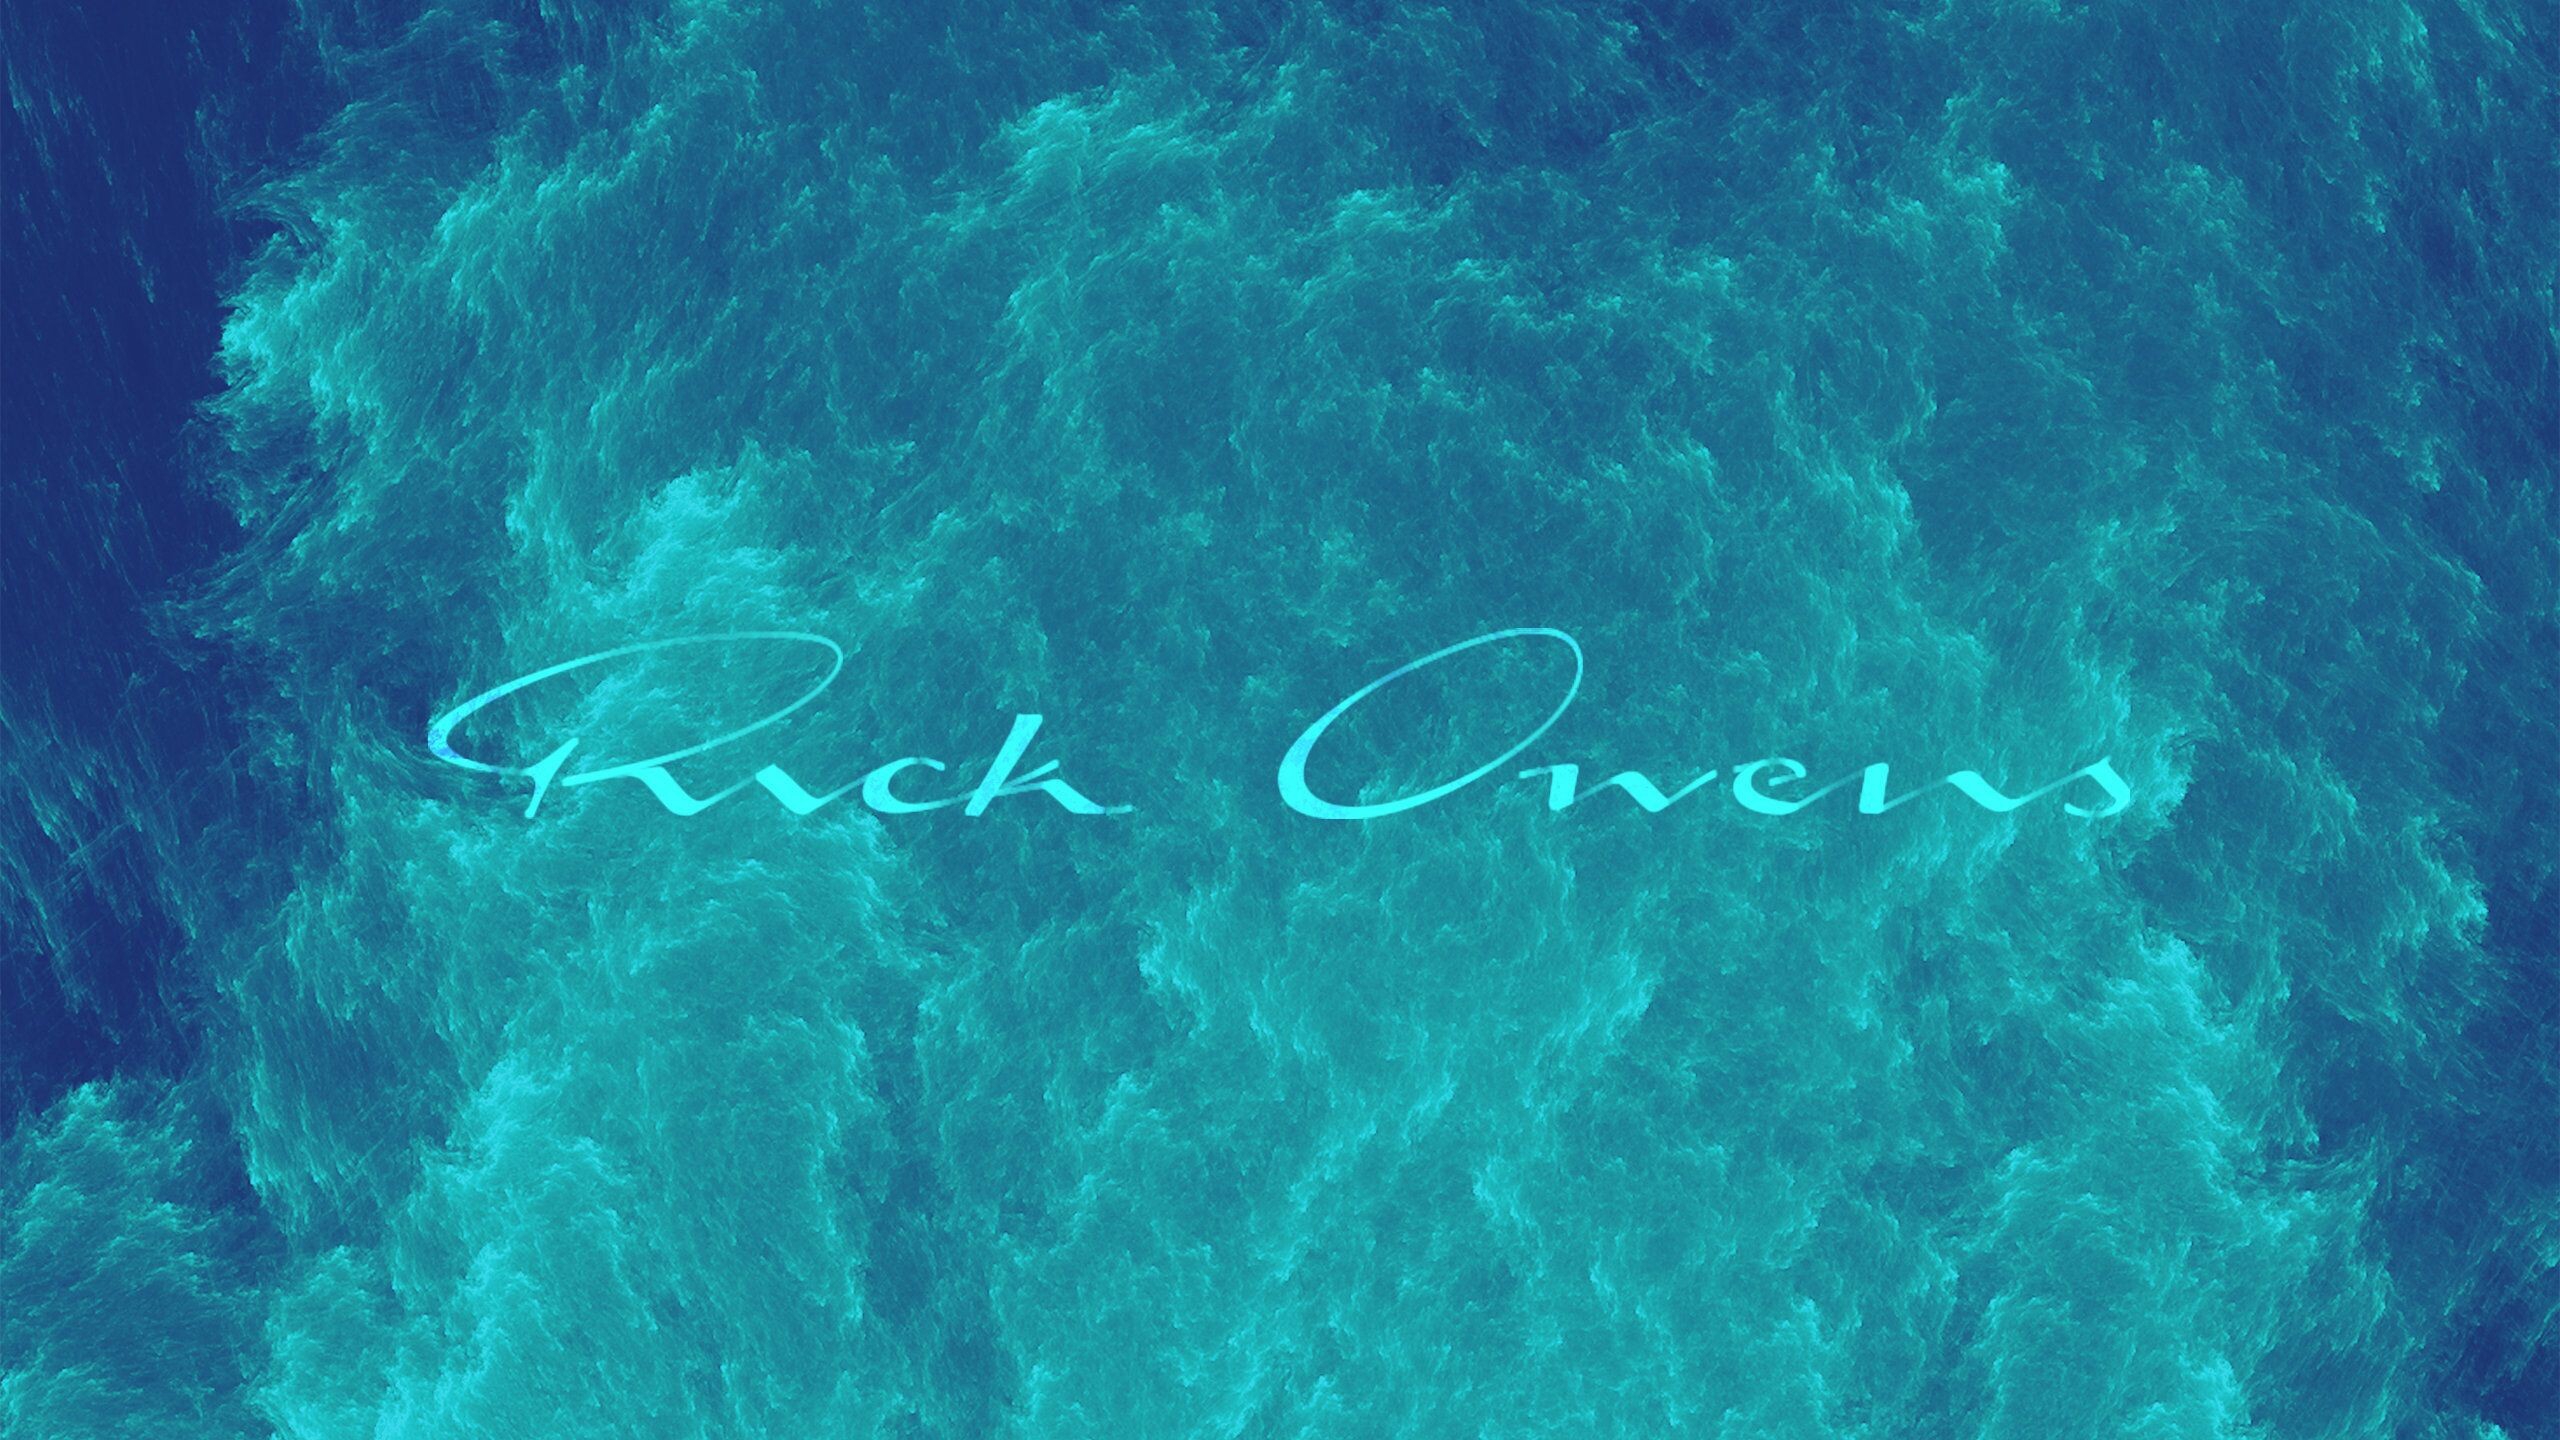 Rick Owens Wallpapers (24+ images inside)